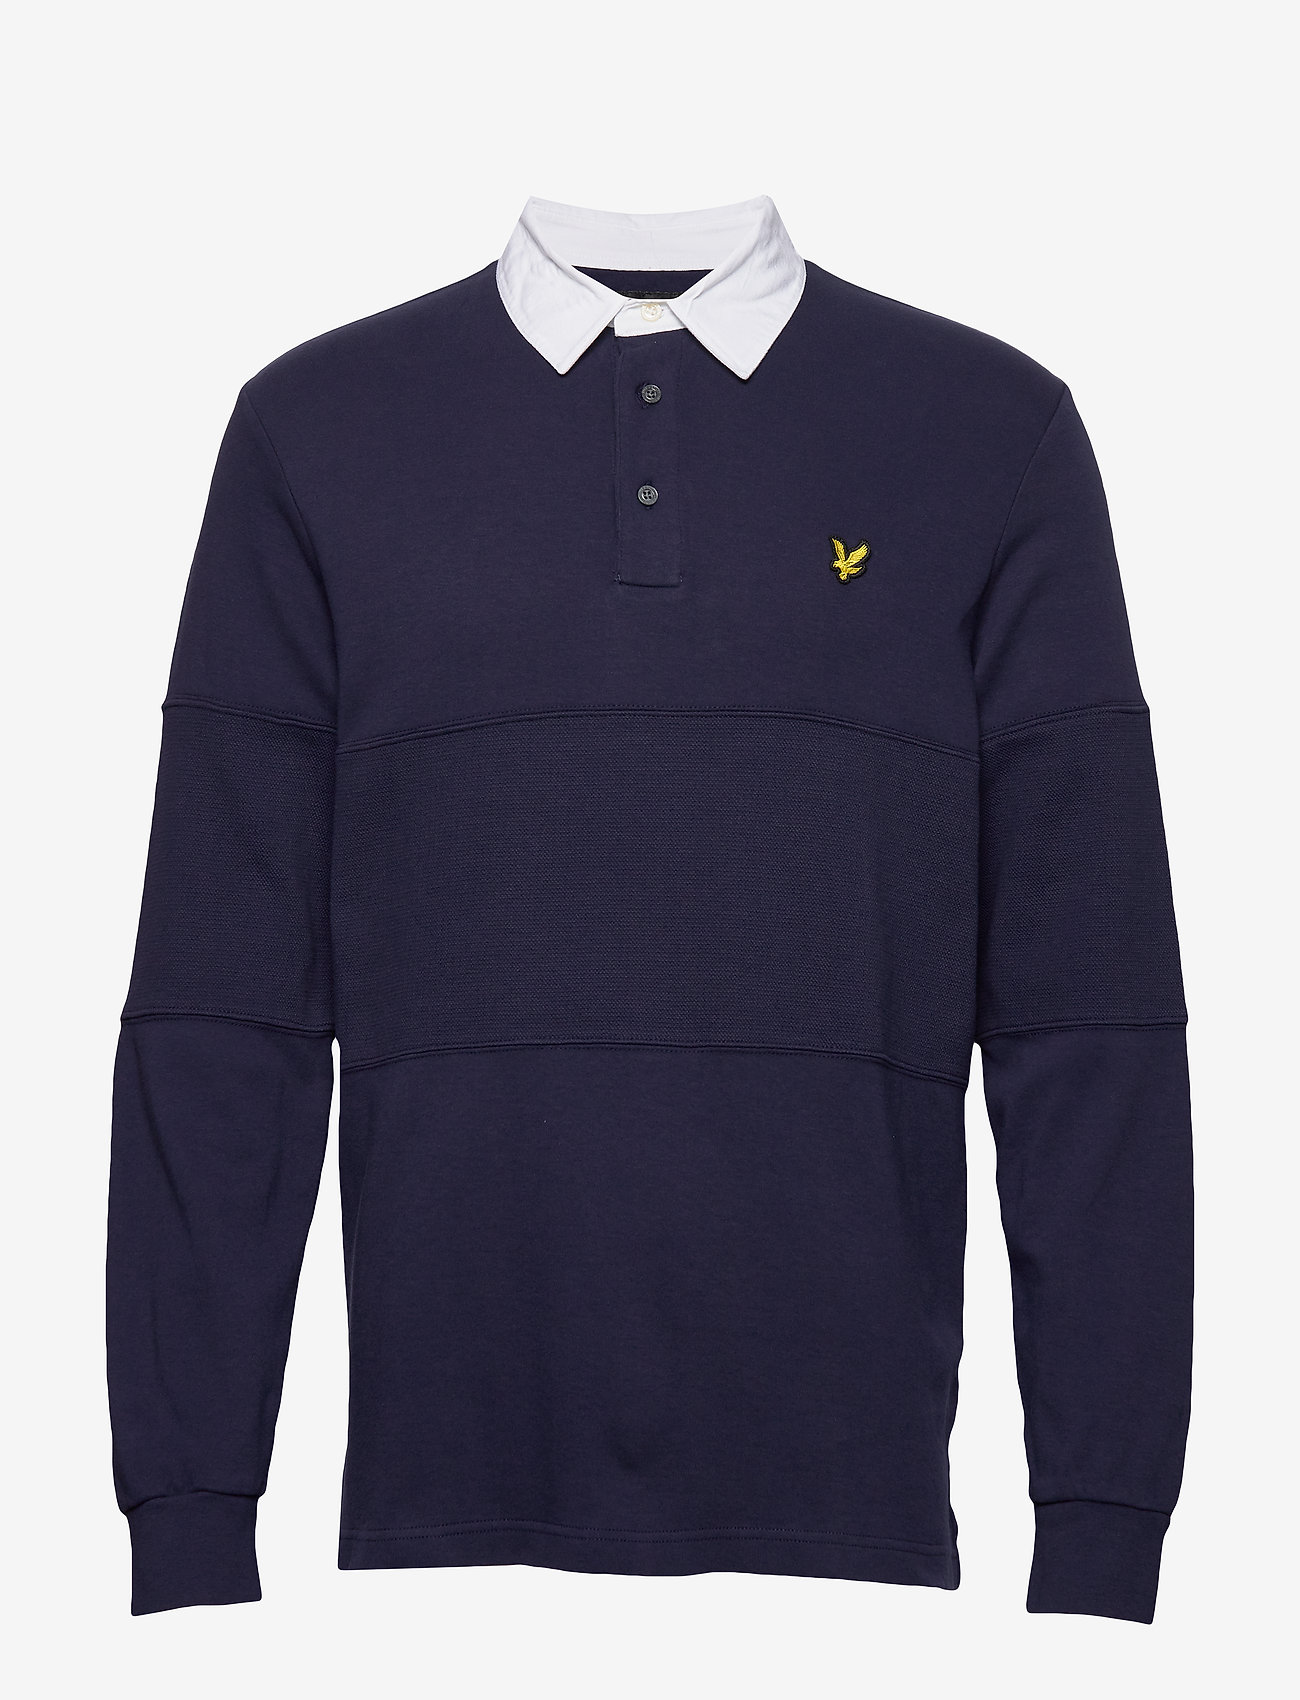 rugby polo shirts long sleeve